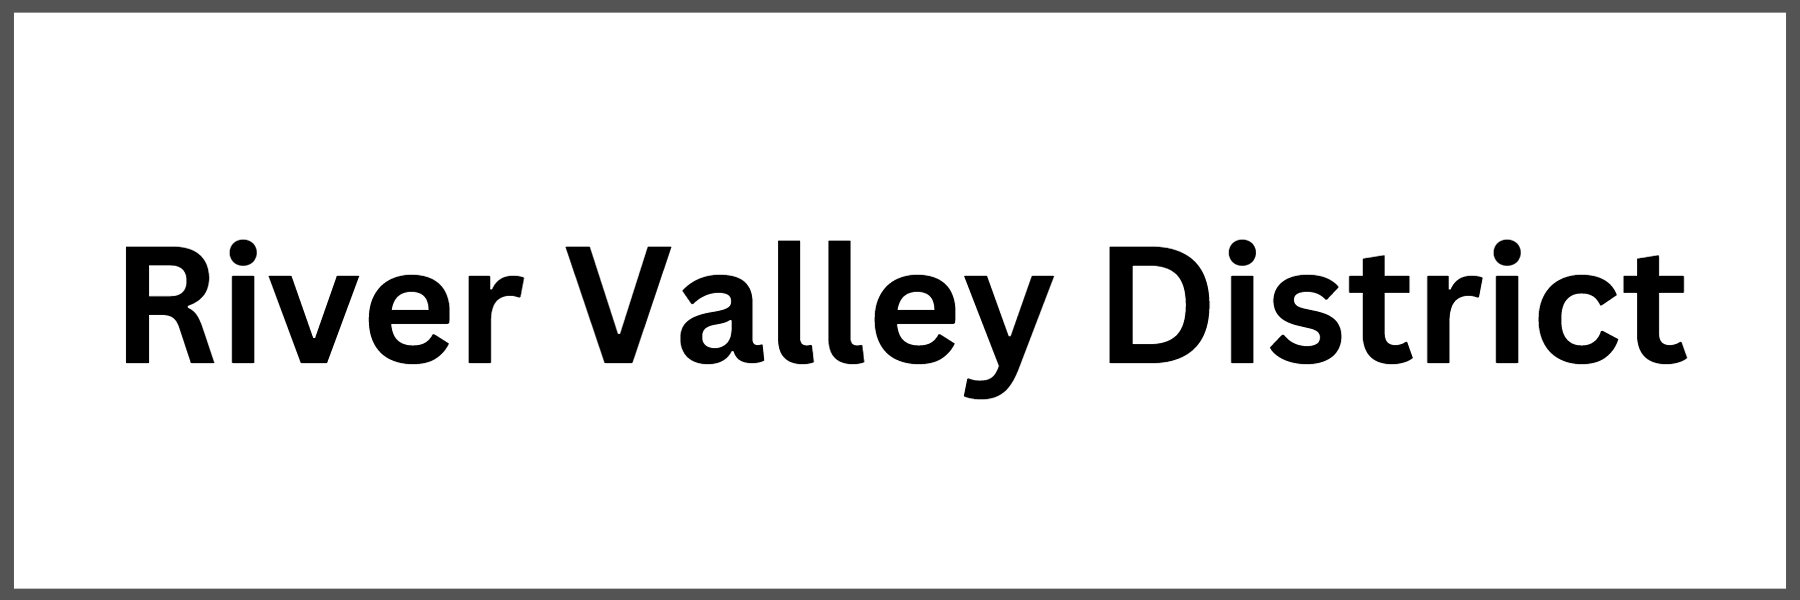 River Valley District